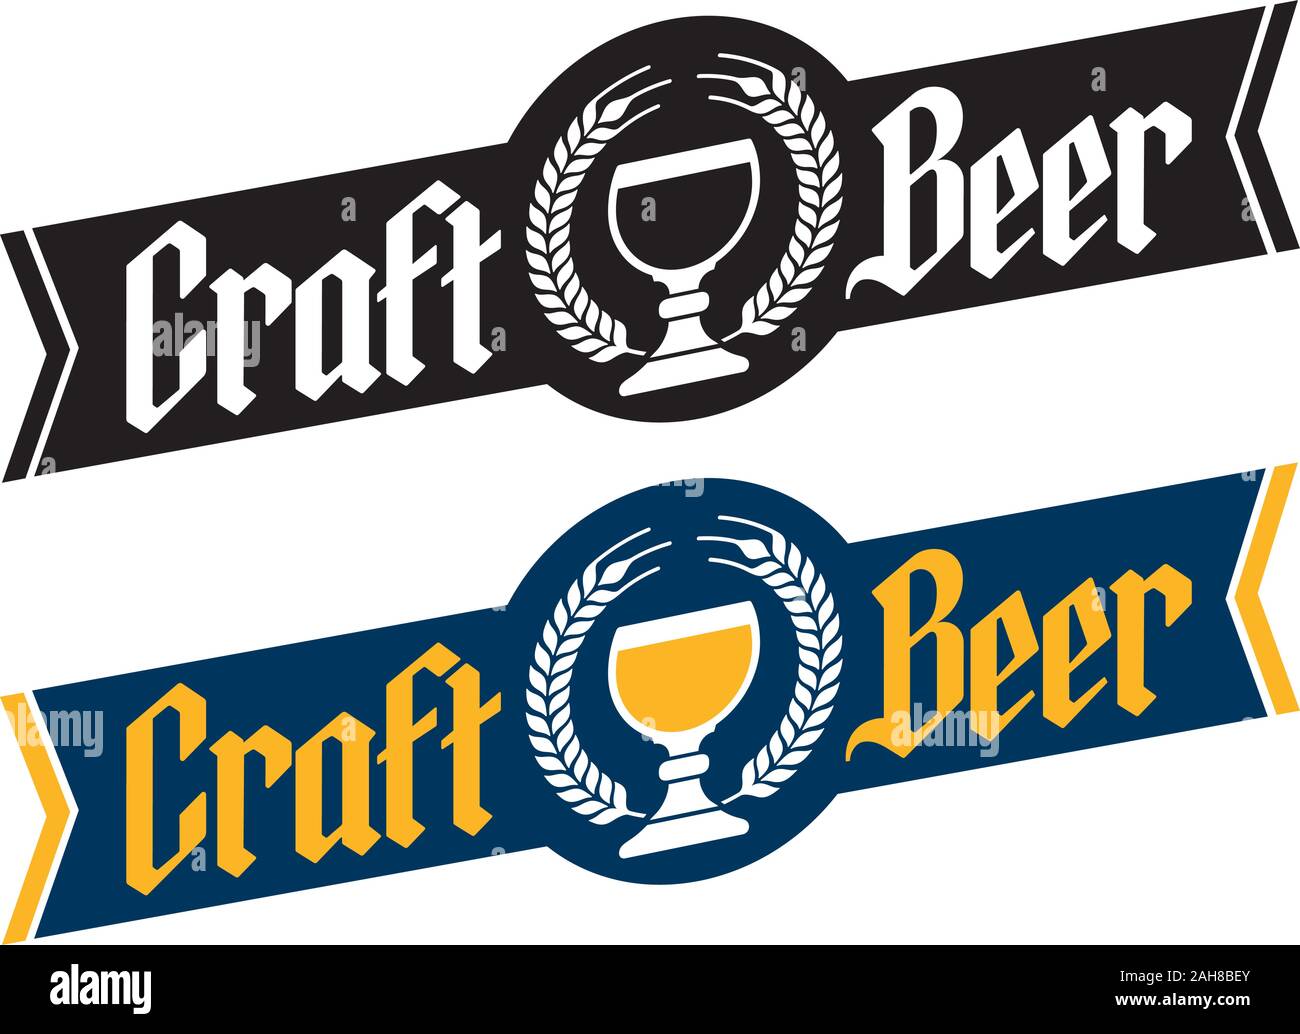 Craft Beer Banner Style Badge or Label with traditional Belgian goblet, barley wreath and gothic lettering. With black and white and color versions. Stock Vector